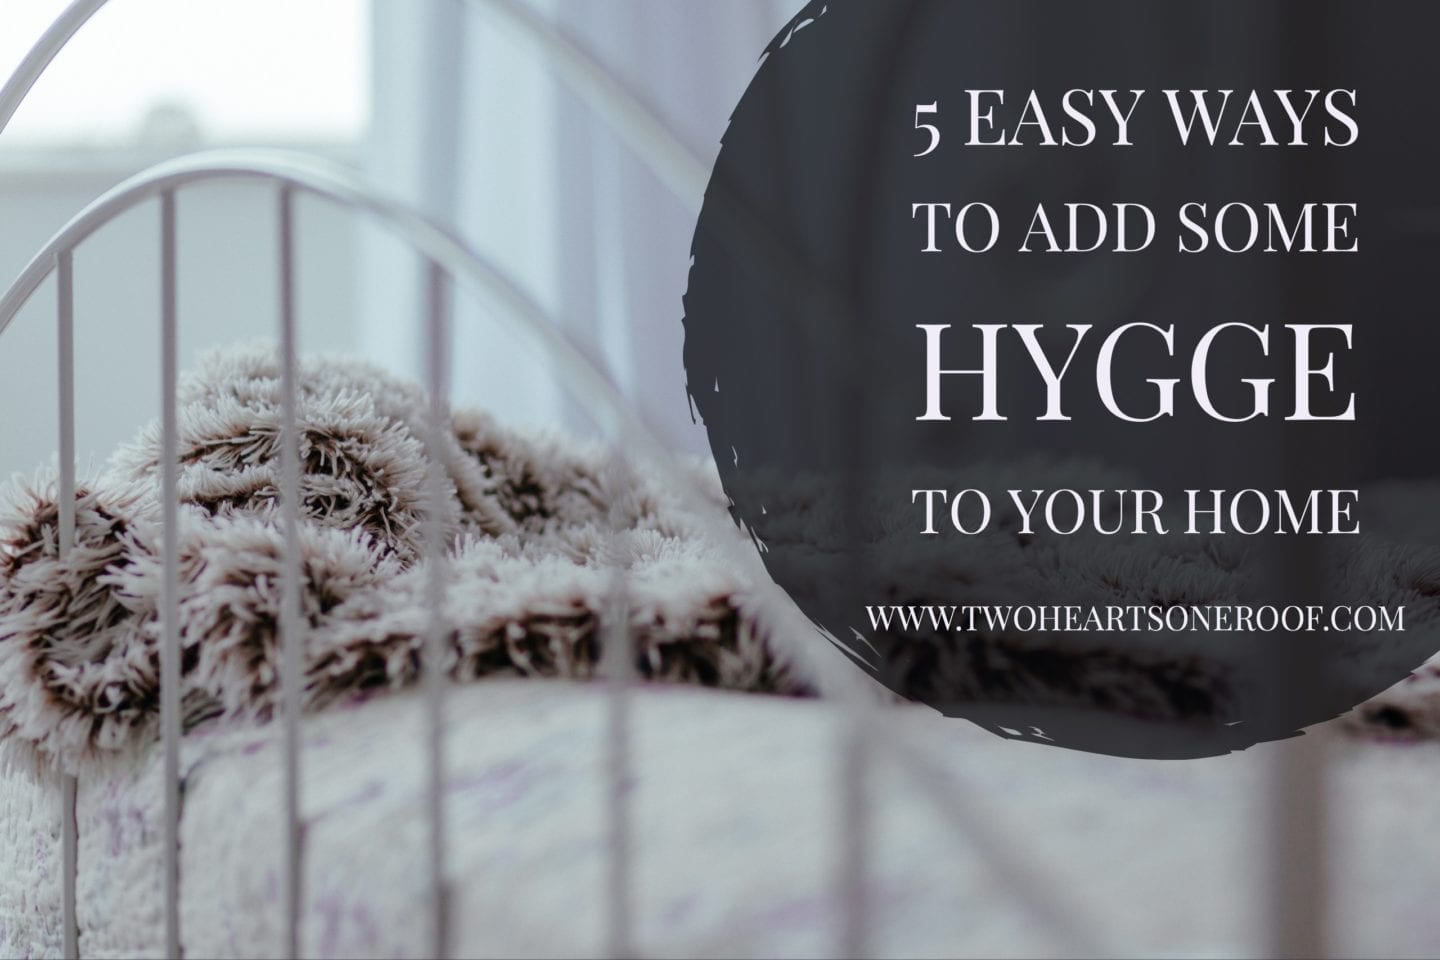 5 easy ways to add some hygge to your home